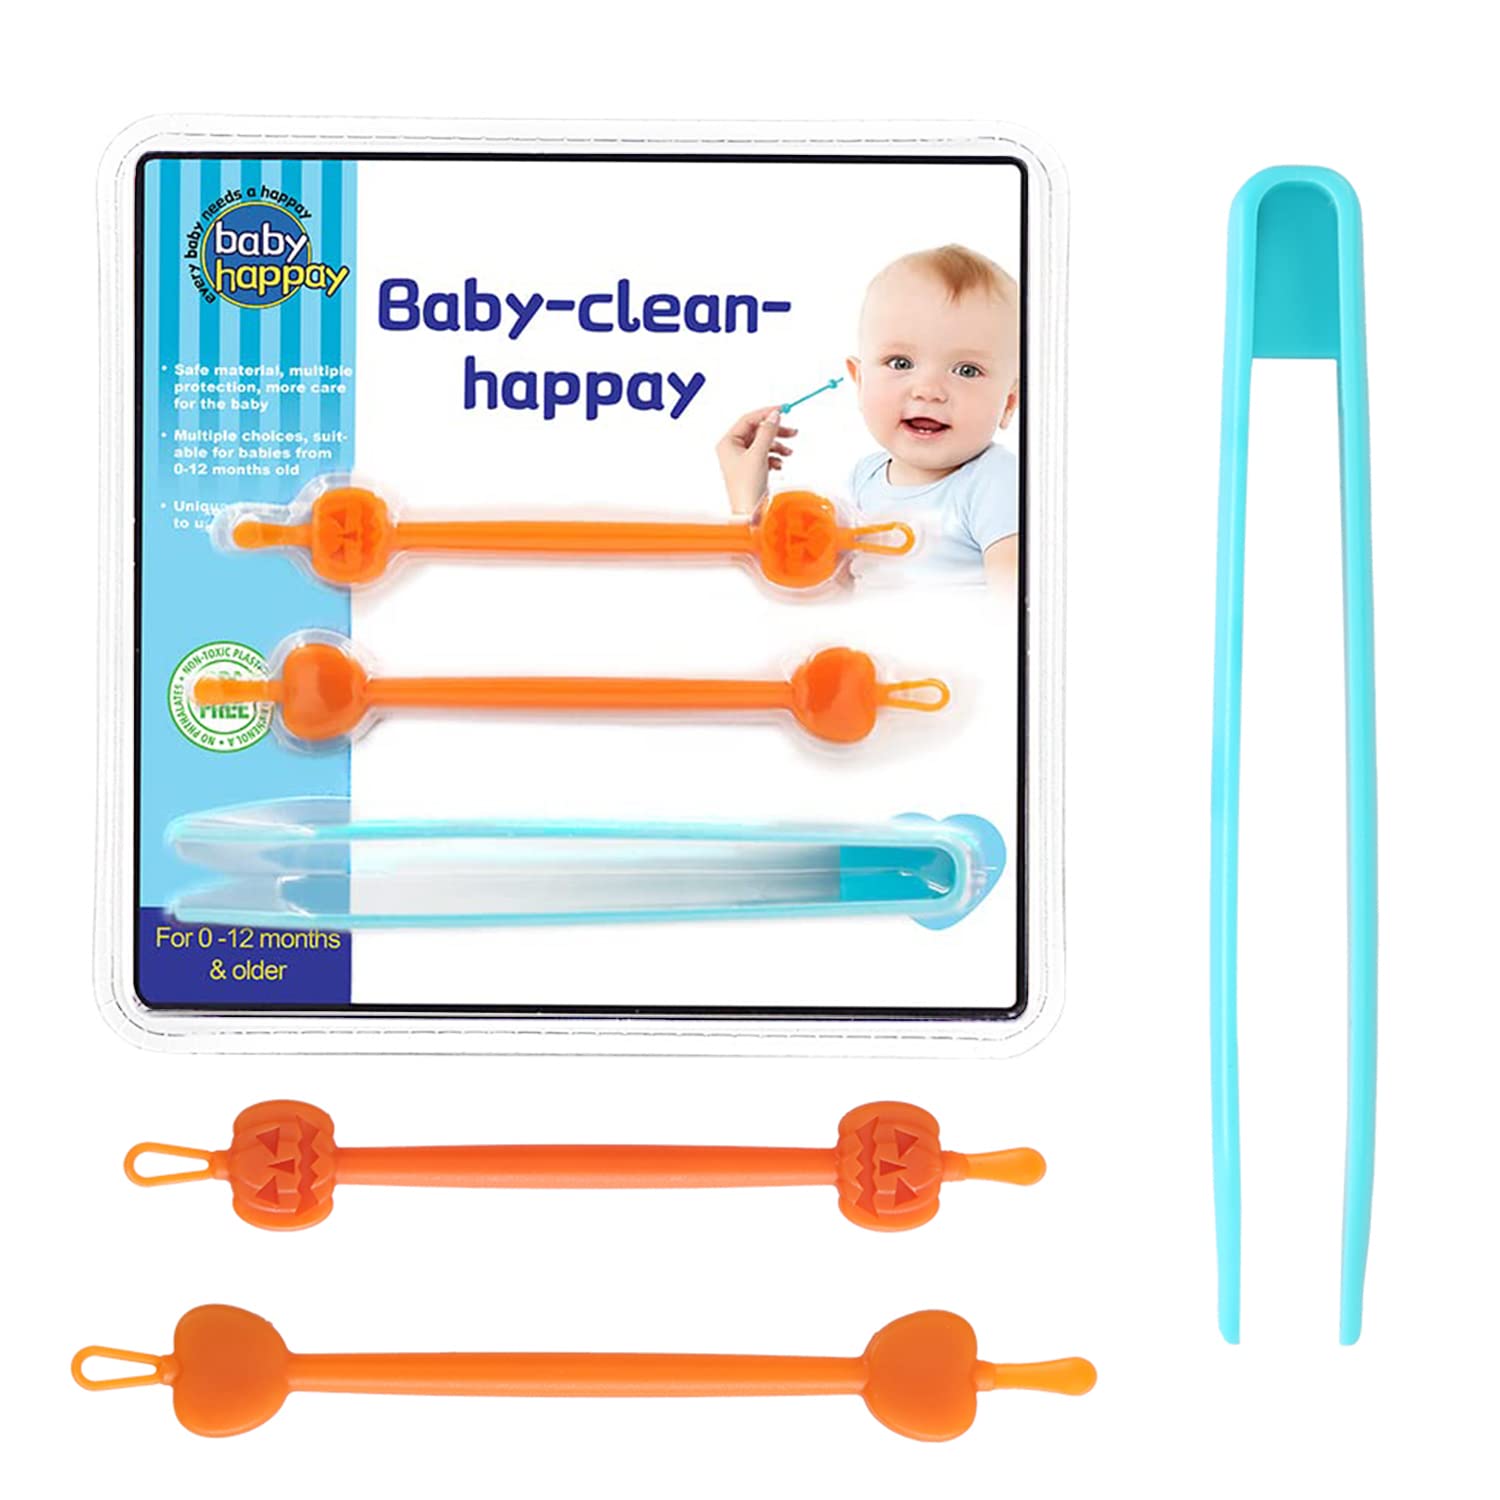 2 In 1 Baby Nose And Ear Gadget, Safe Baby Booger Remover, Nose Cleaning  Tweezers, Nose Cleaner For Baby Infants And Toddlers, Dual Earwax And Snot  Re